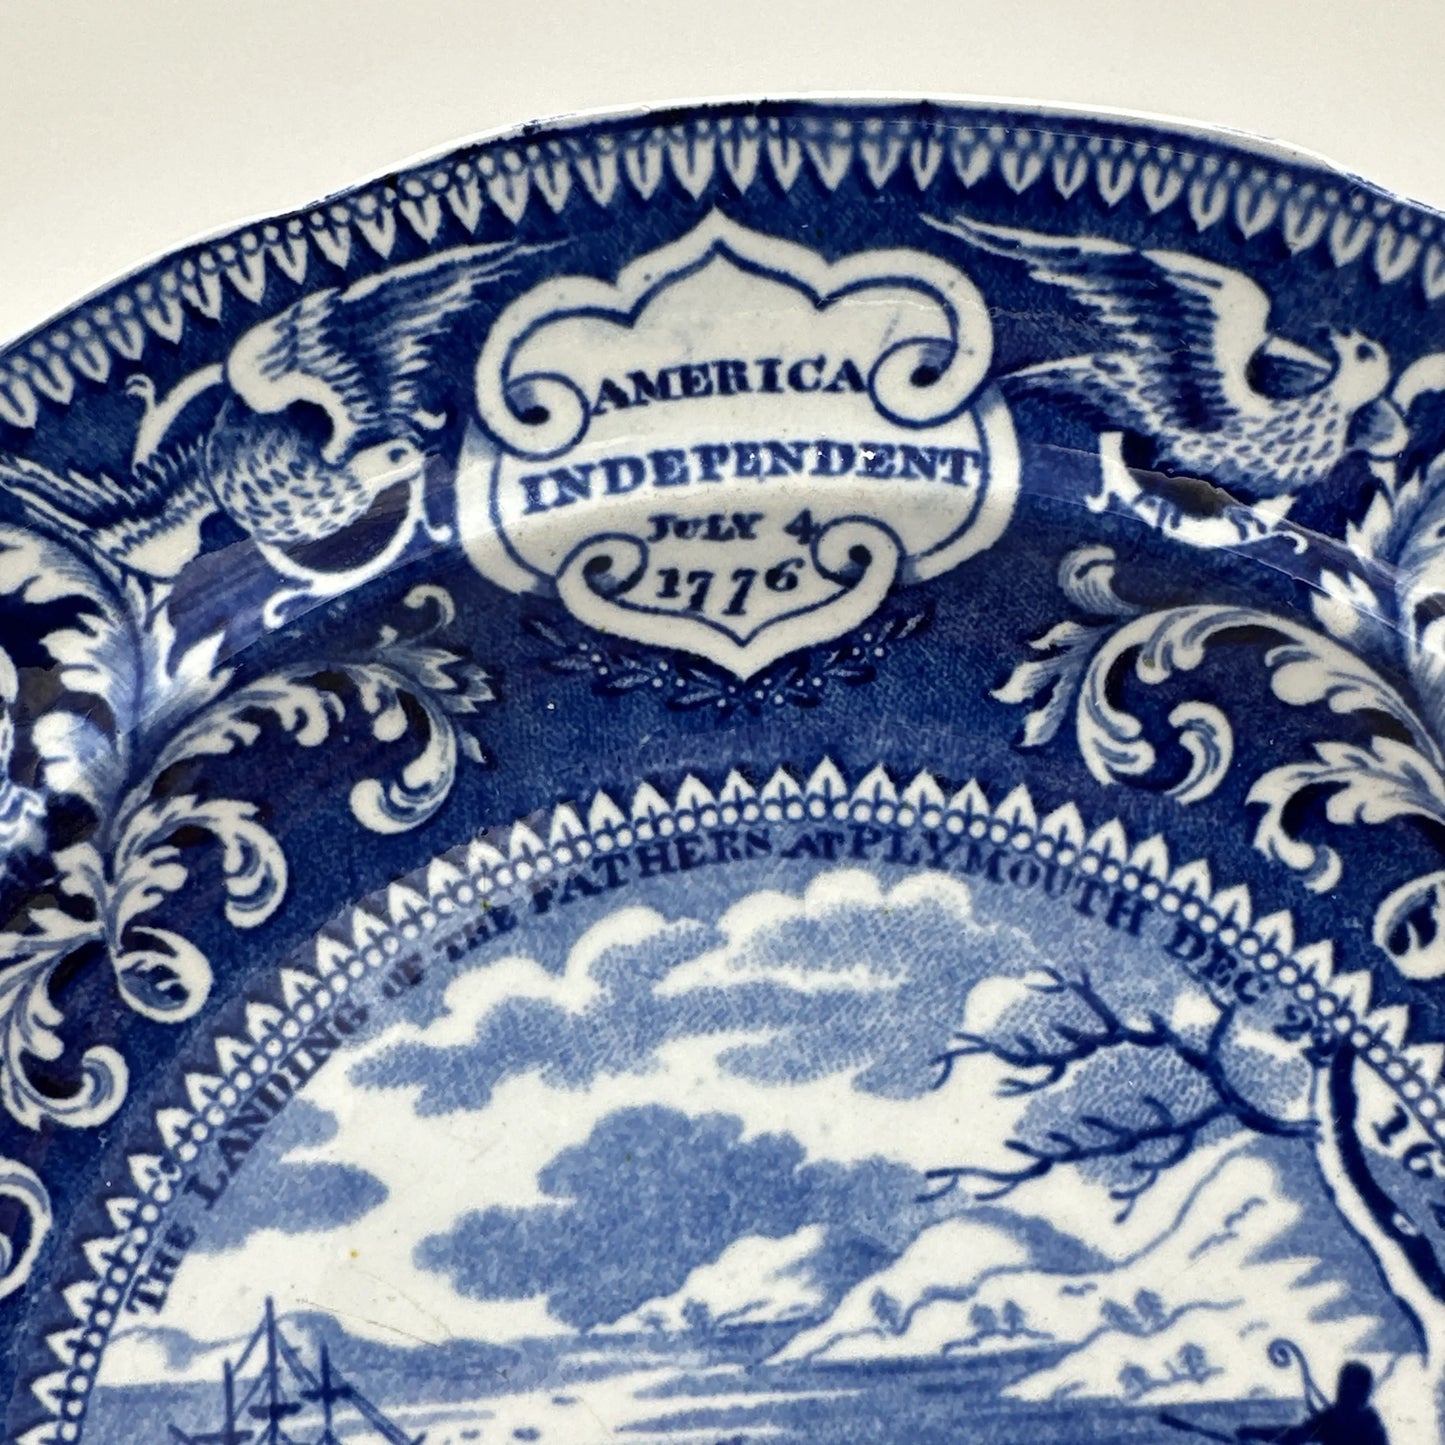 Historical Staffordshire blue plates c1825 commemorating the landing at Plymouth and four other historical events